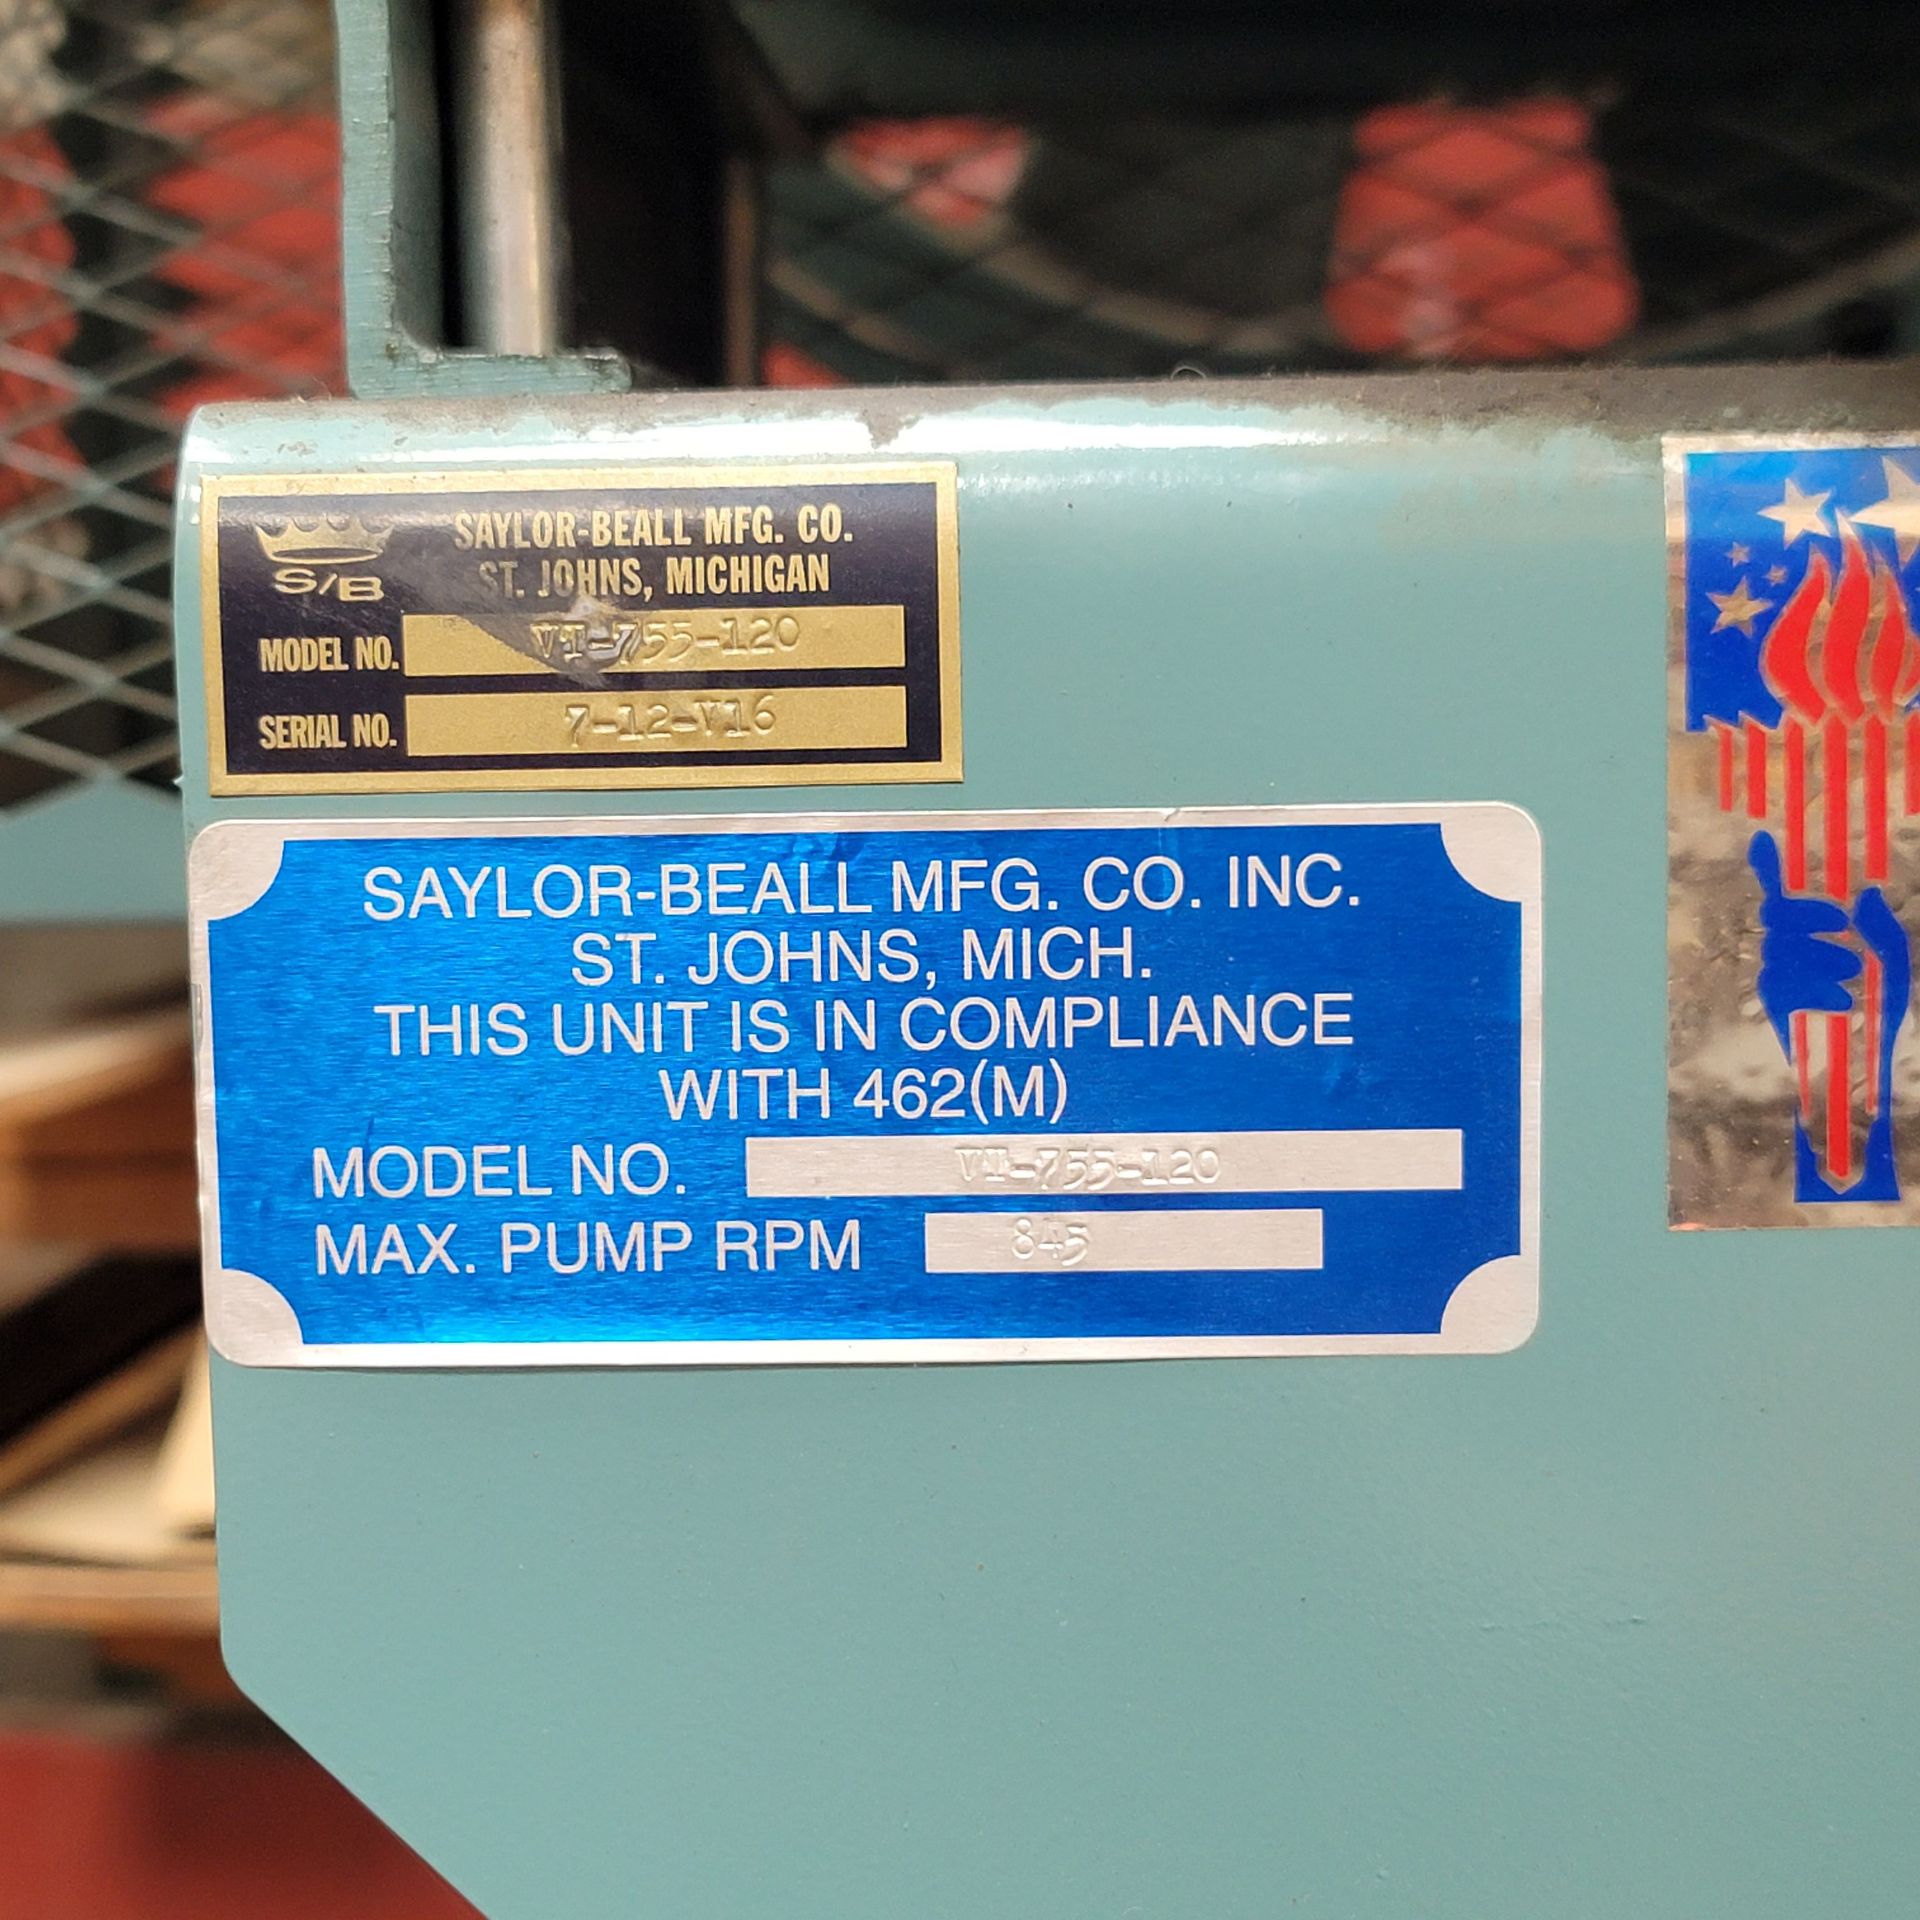 2016 SAYLOR-BEALL TWO-STAGE PISTON AIR COMPRESSOR, MODEL VT-755-120, 10 HP, 120 GALLON VERTICAL - Image 2 of 2